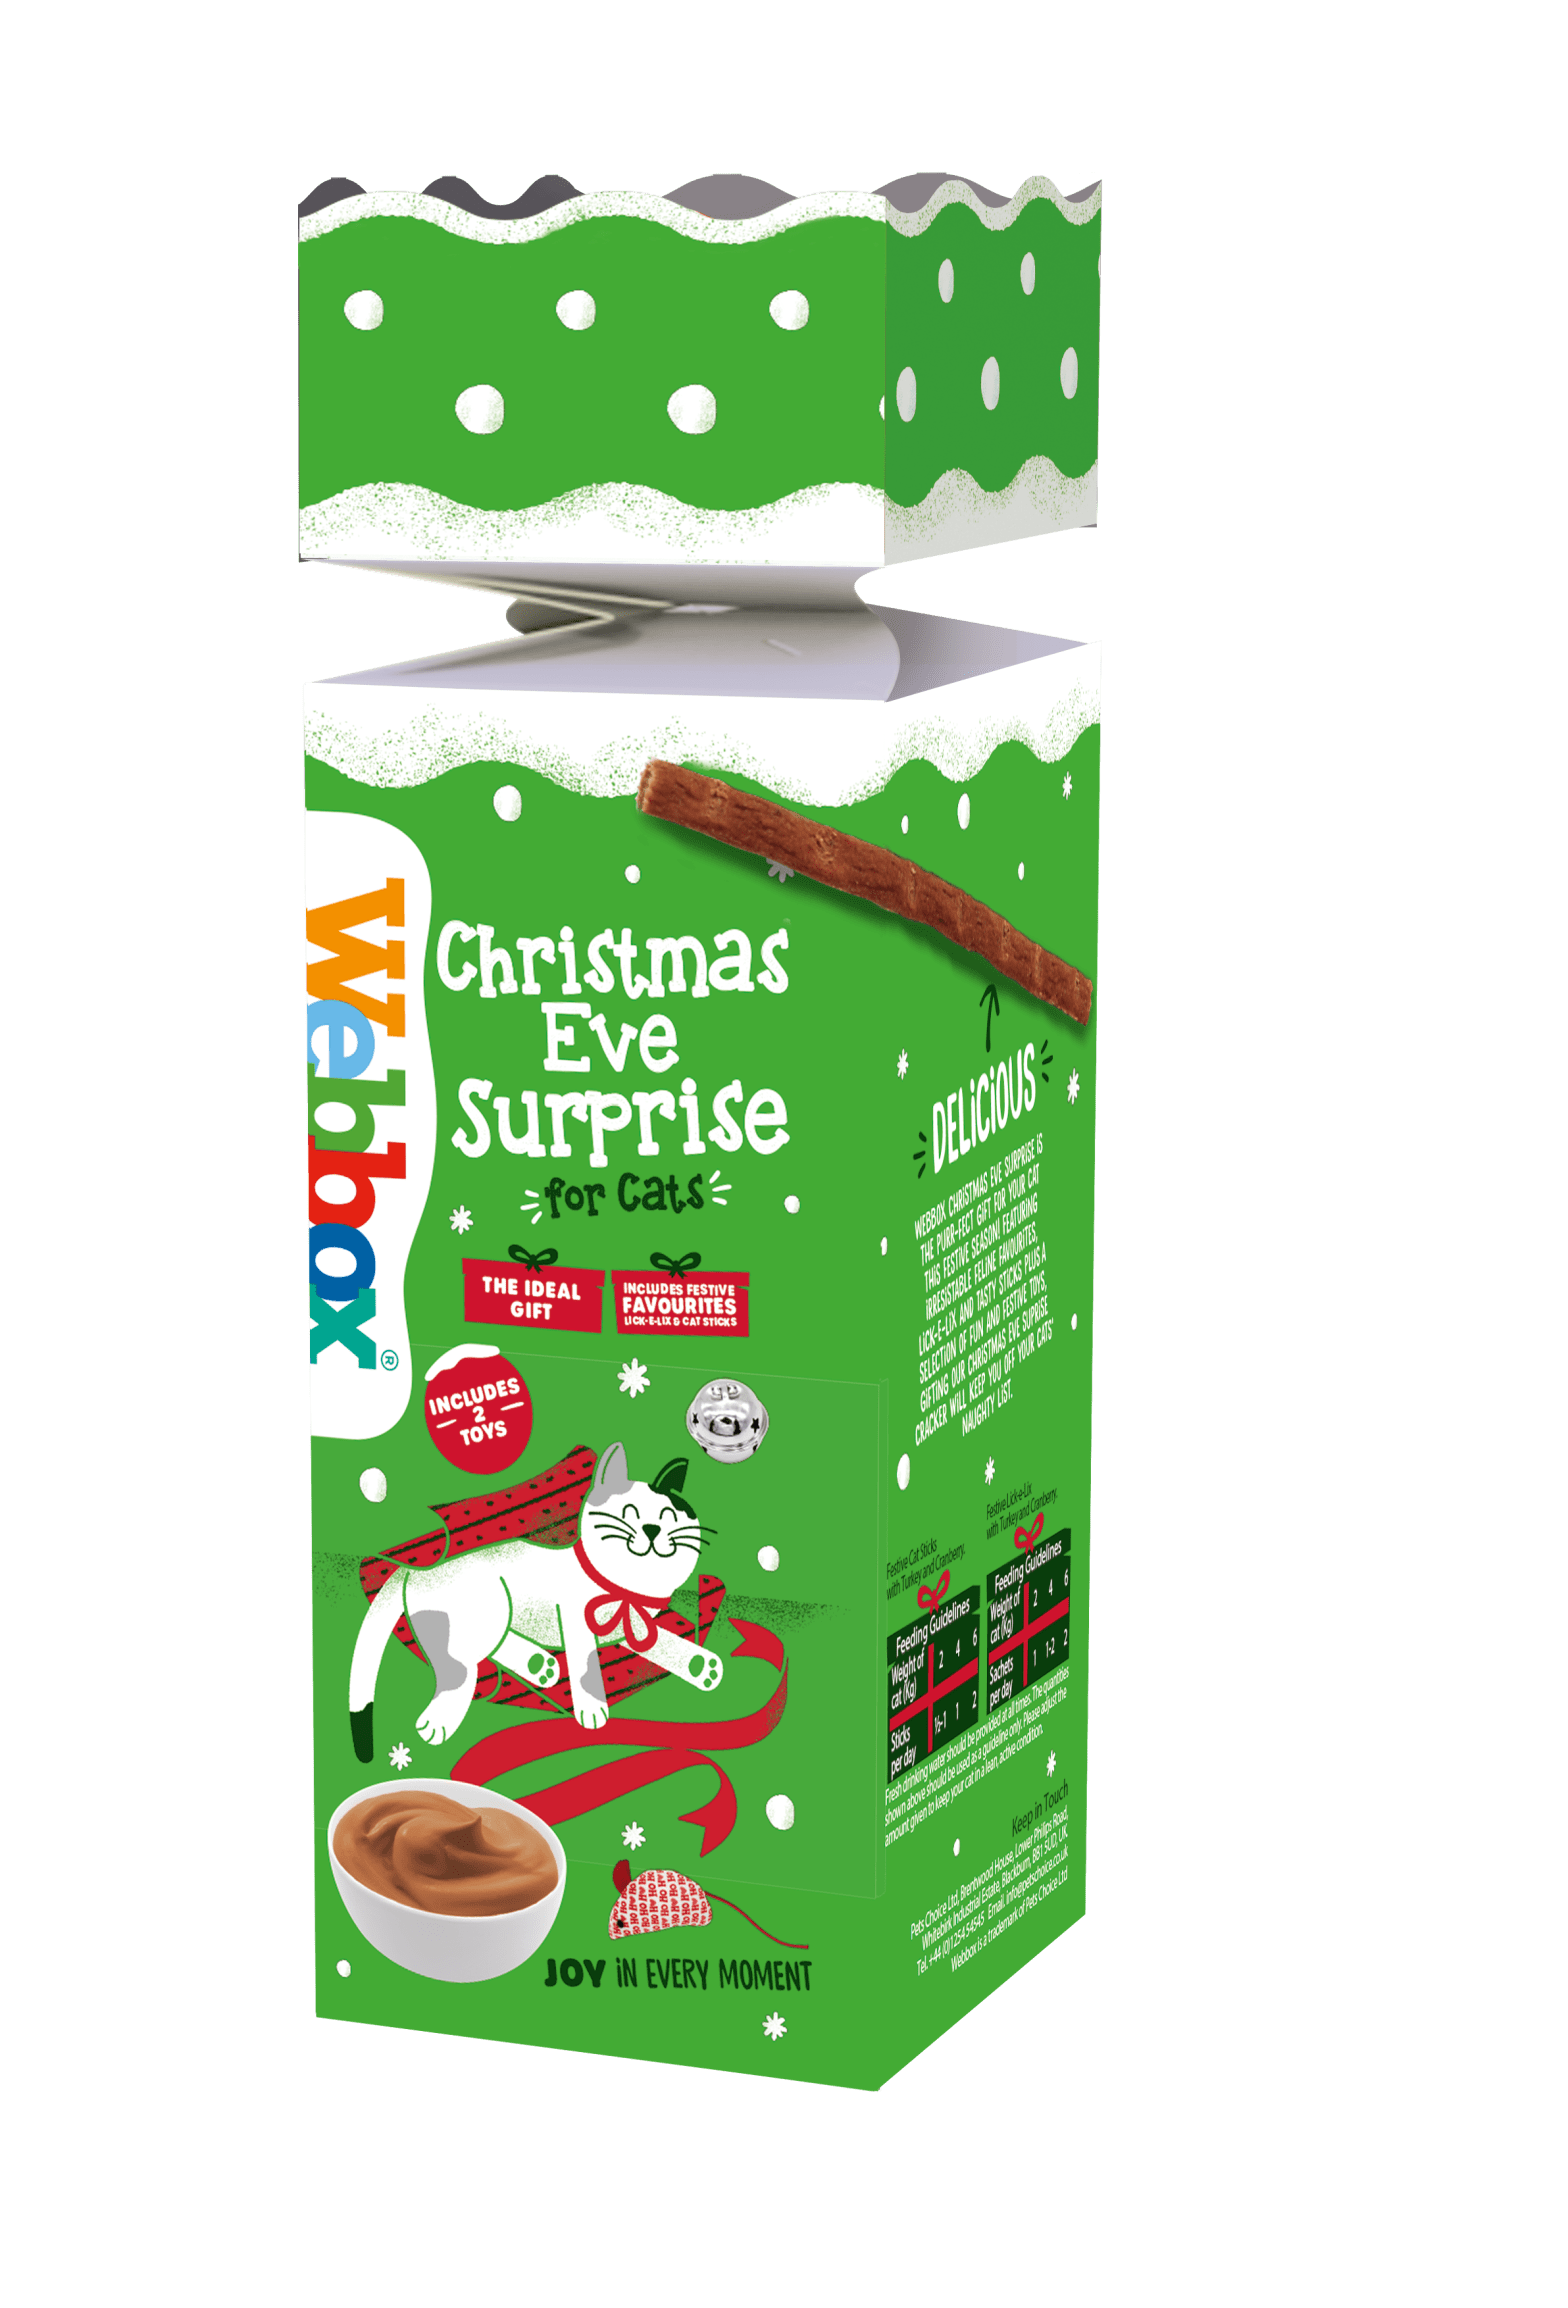 Webbox Christmas Eve Surprise for Cats